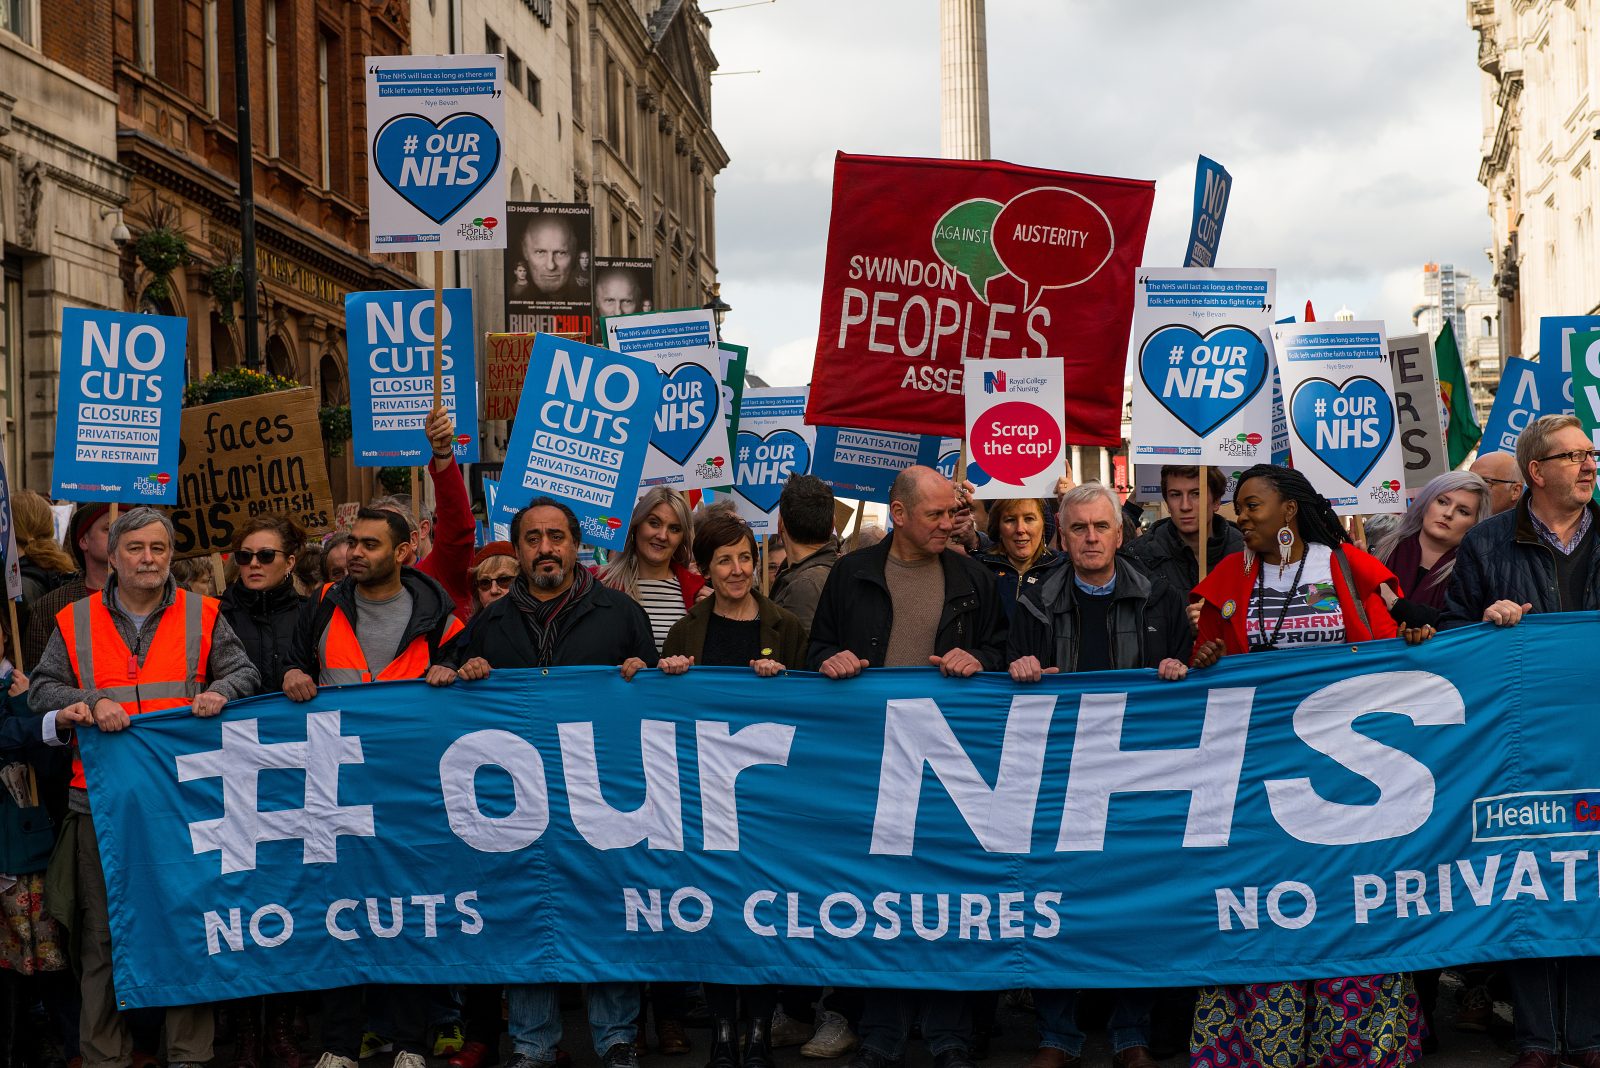 Trump is half right, the NHS is broke, but it will always work because of its people